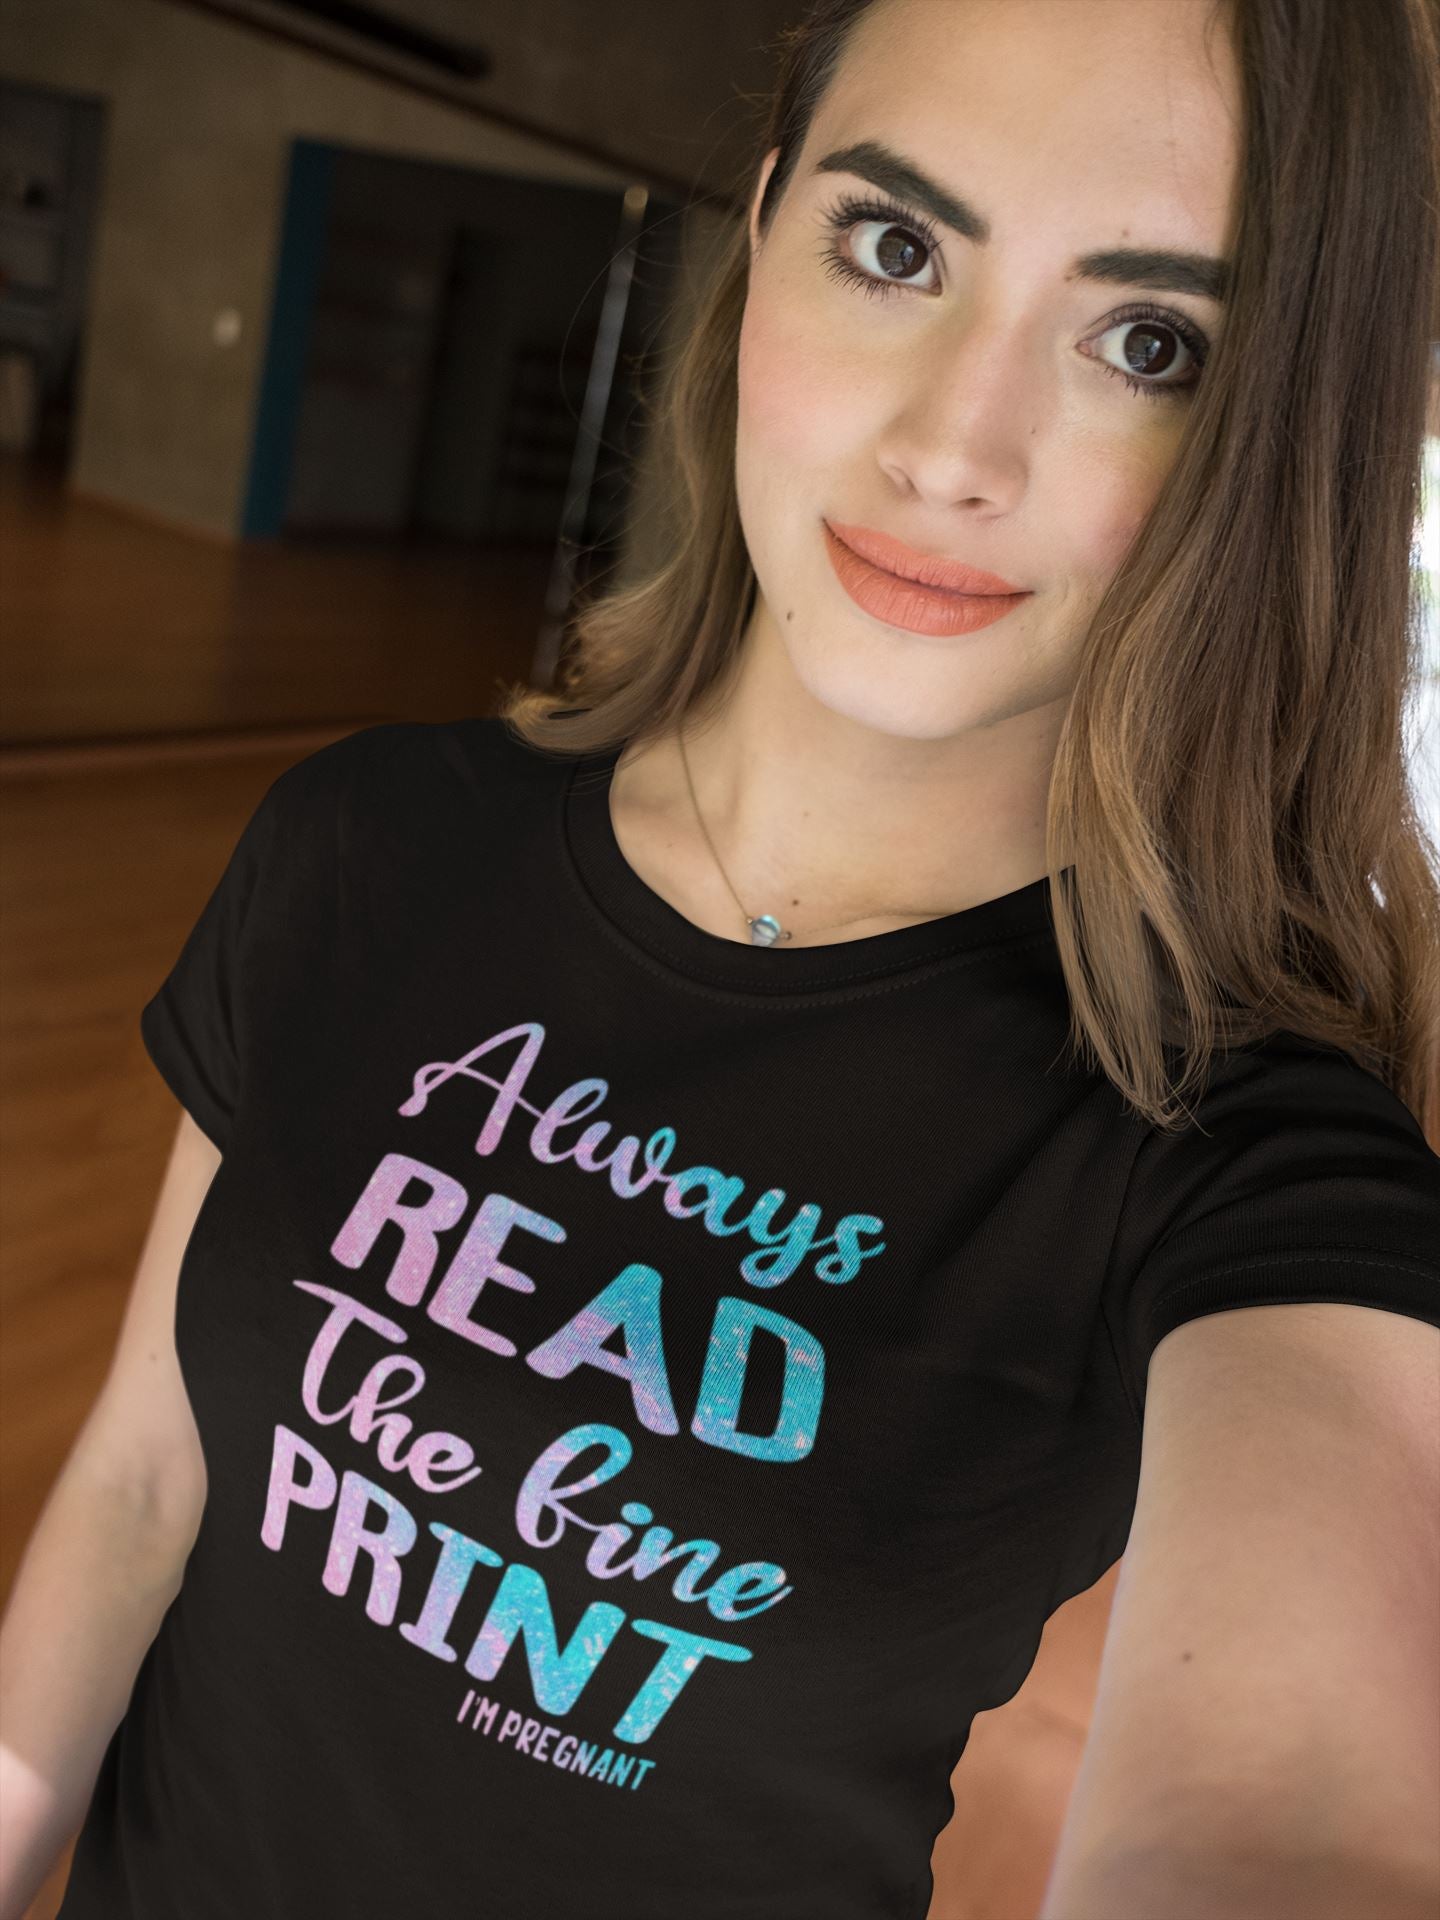 Always Read the Fine Print - I'm Pregnant Special Black T Shirt for Women freeshipping - Catch My Drift India